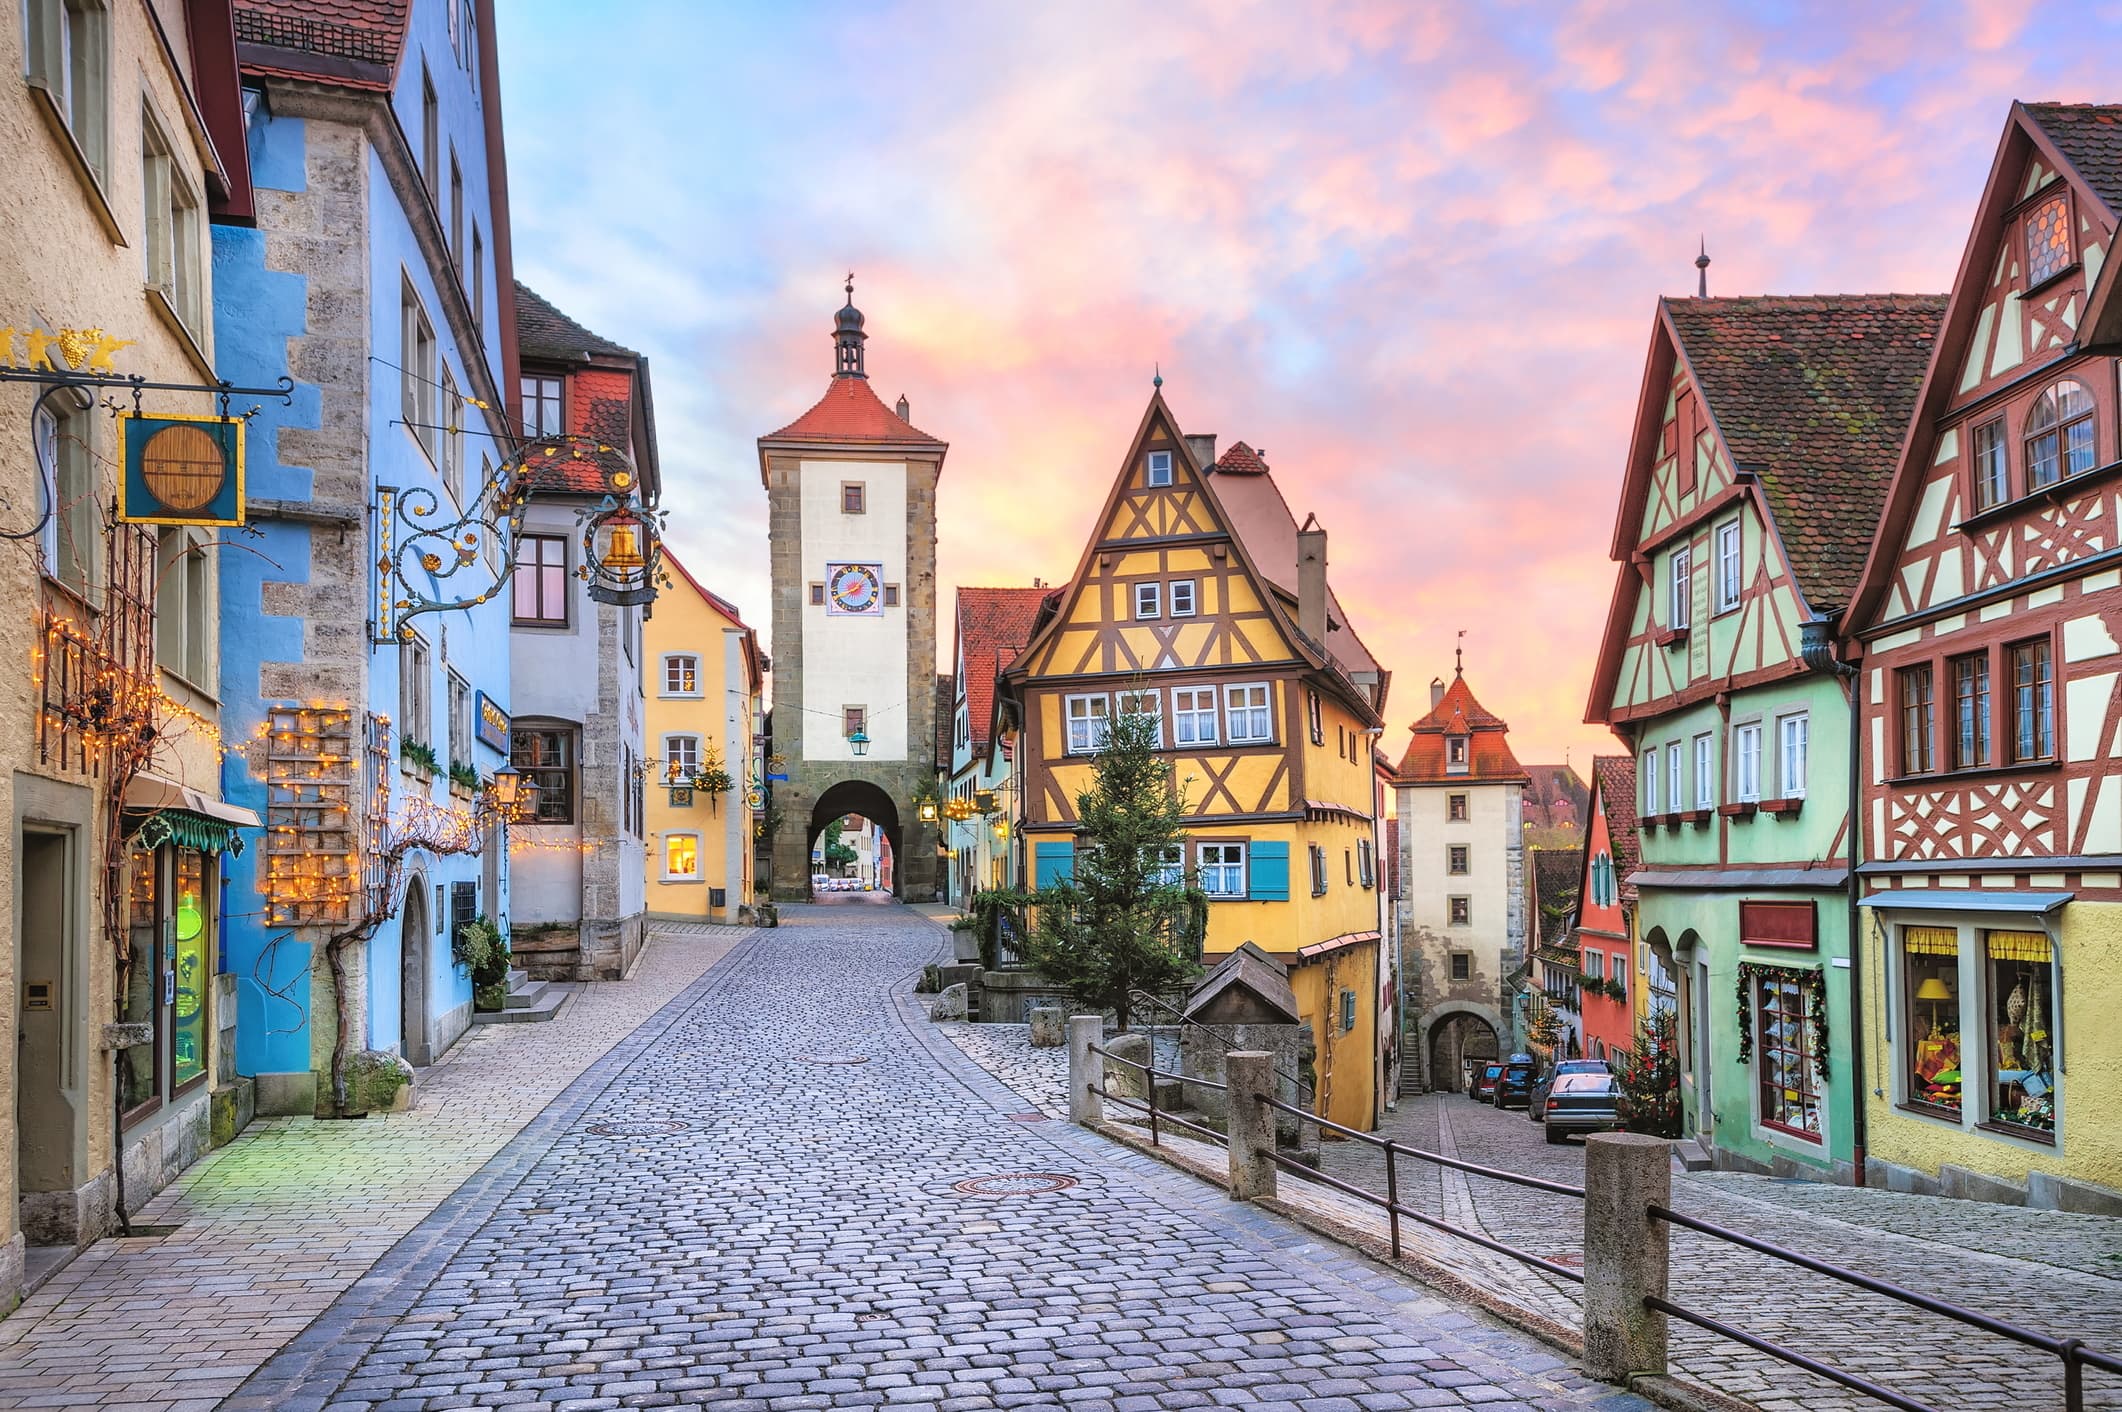 A view of the charming town square of Rothenburg, Bavaria, Germany, with clock tower and medieval buildings.